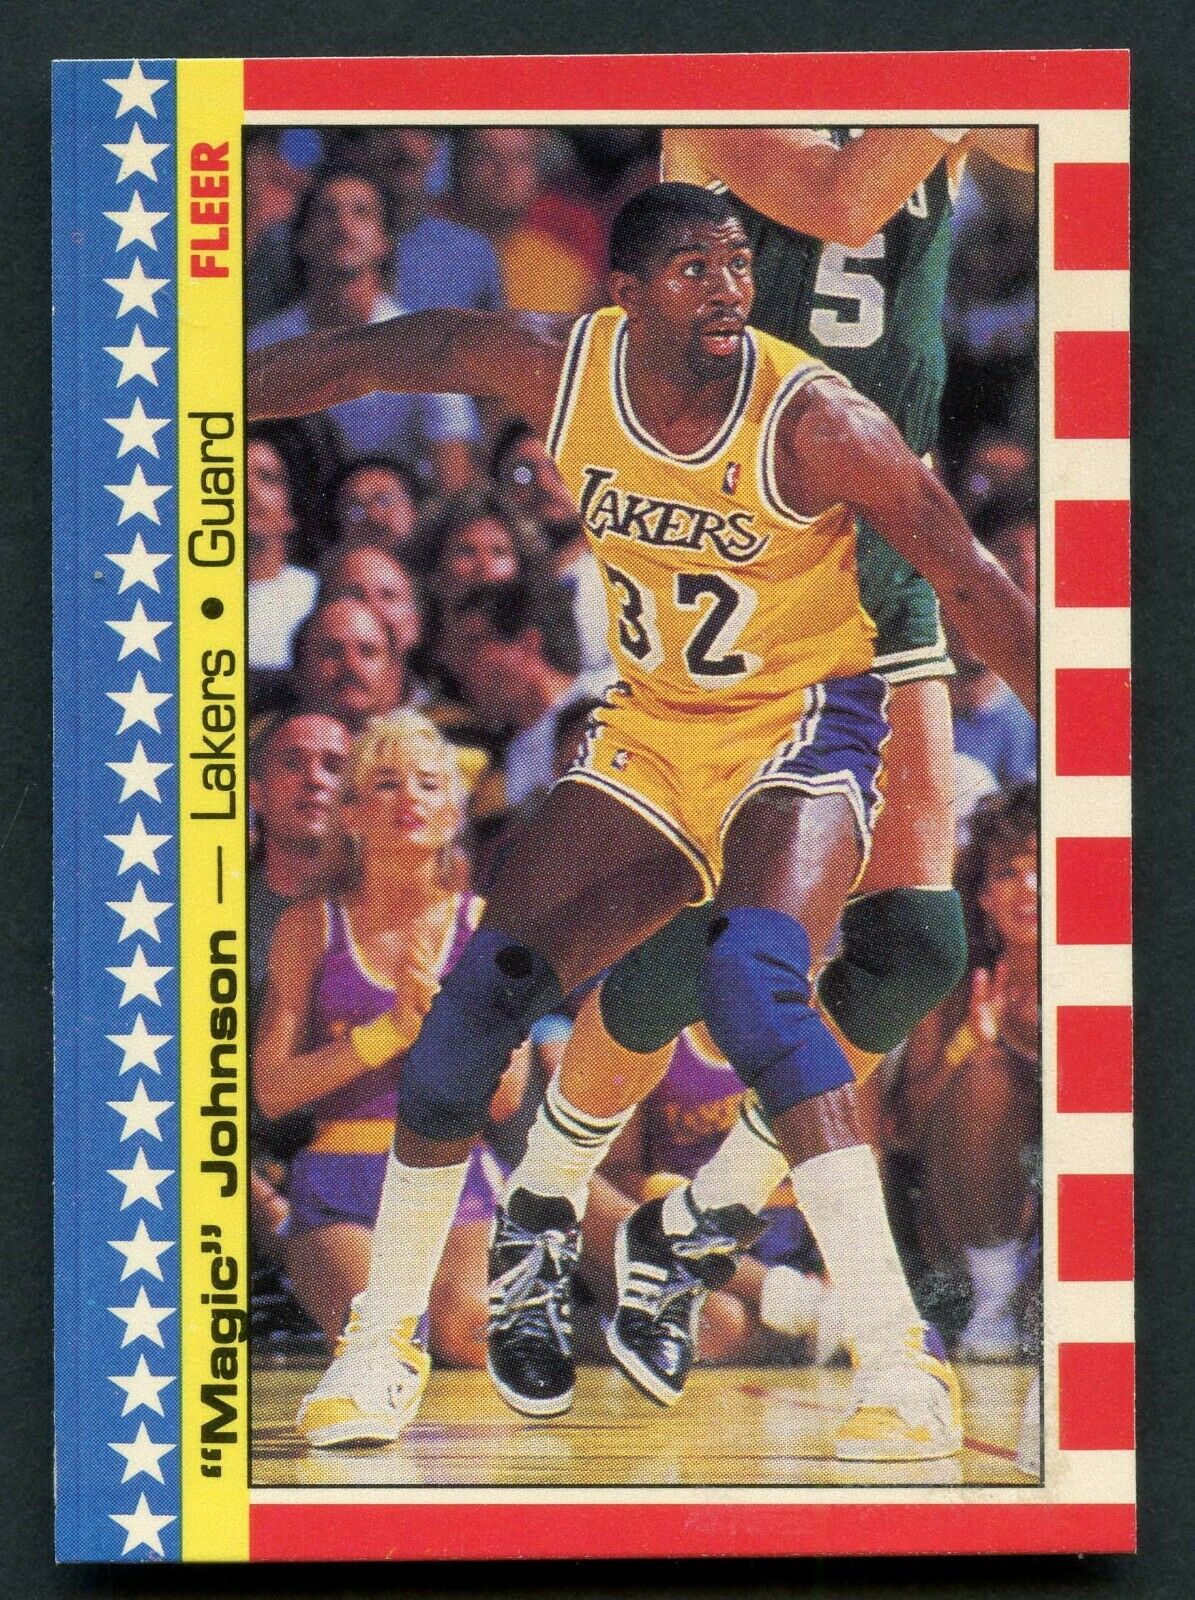 1987-88 Fleer Stickers # 1 Magic Johnson (Lakers) Basketball cards value